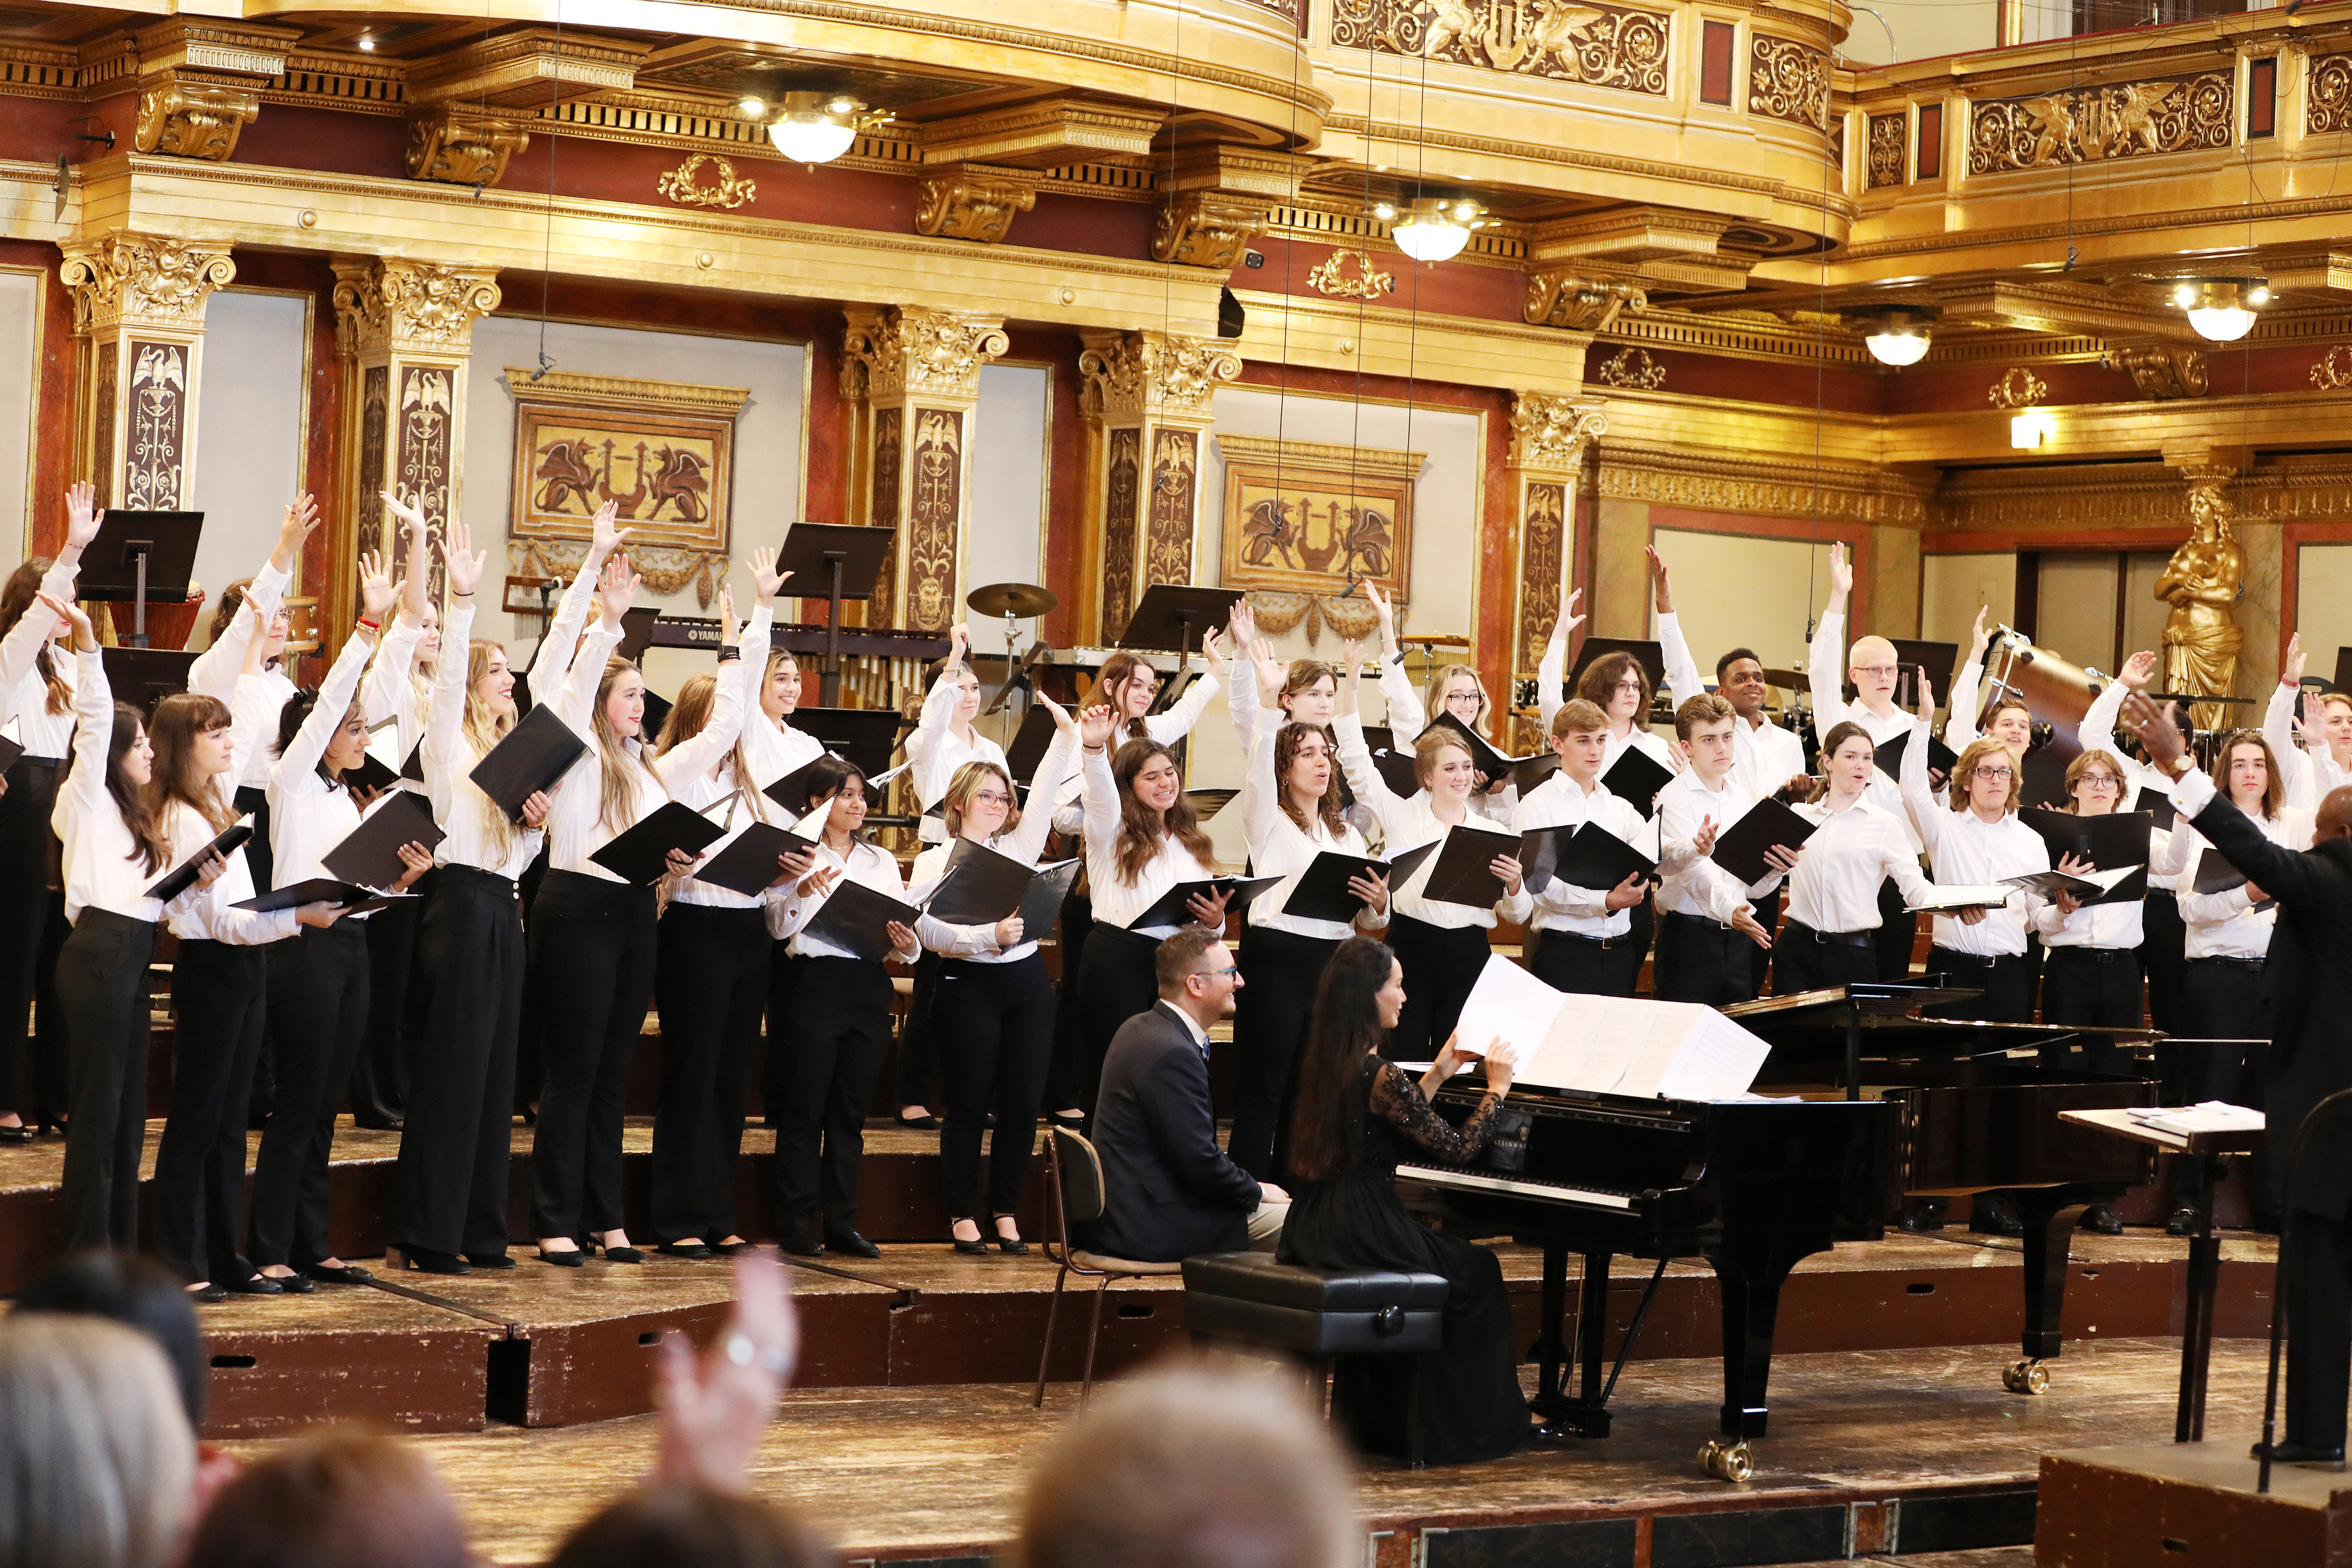 (c) Dieter Nagl for WorldStrides - High School Honors Choir under the baton of Jeffery L. Ames at the "Golden Hall" of the Musikverein